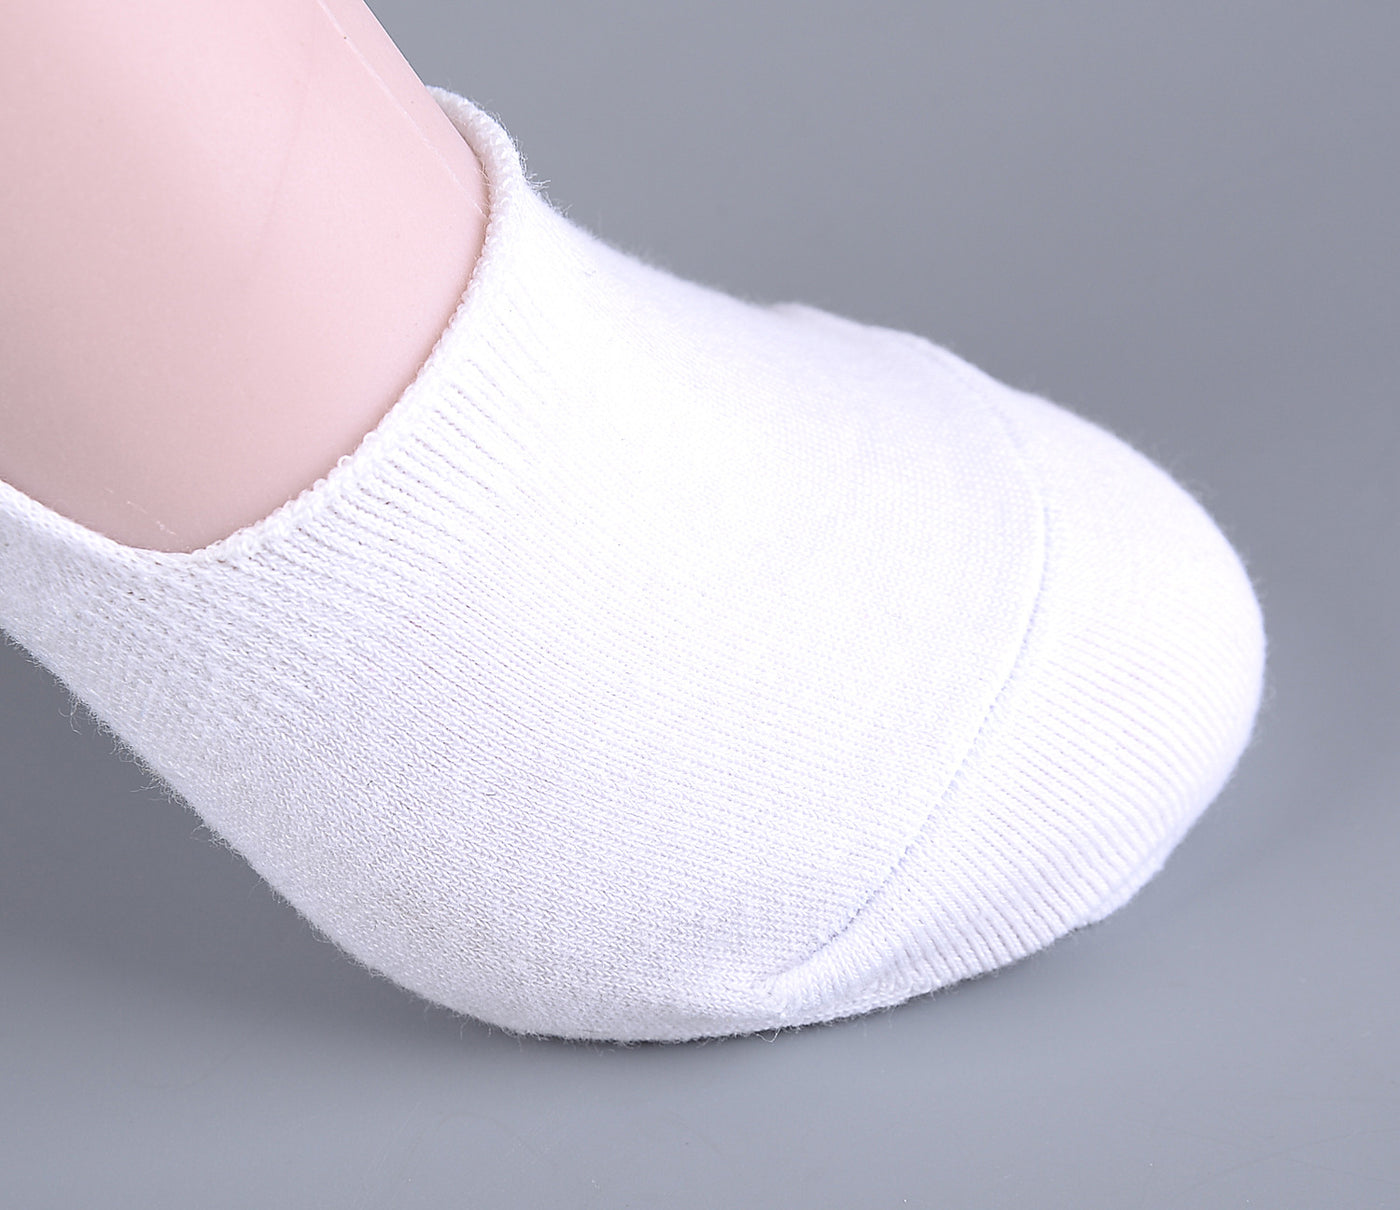 2 Pairs Finest Combed Cotton Invisible Socks Plain - White